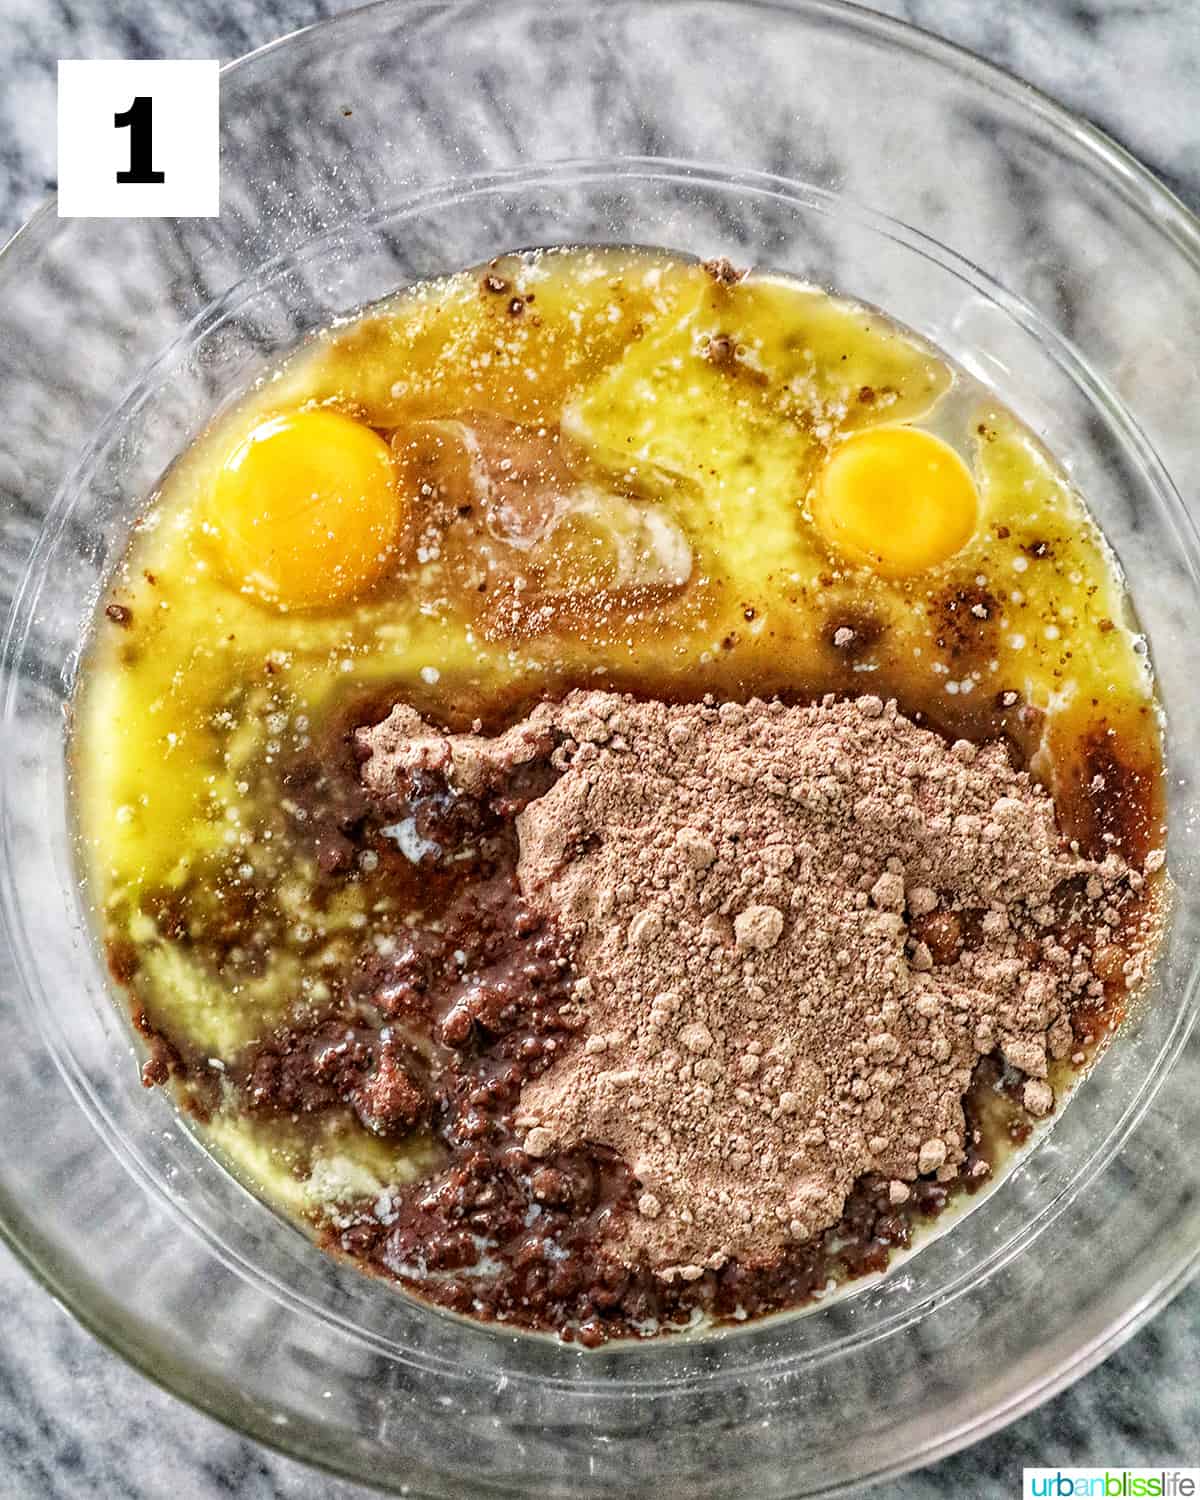 eggs and chocolate cake mix in a glass bowl on marble table.